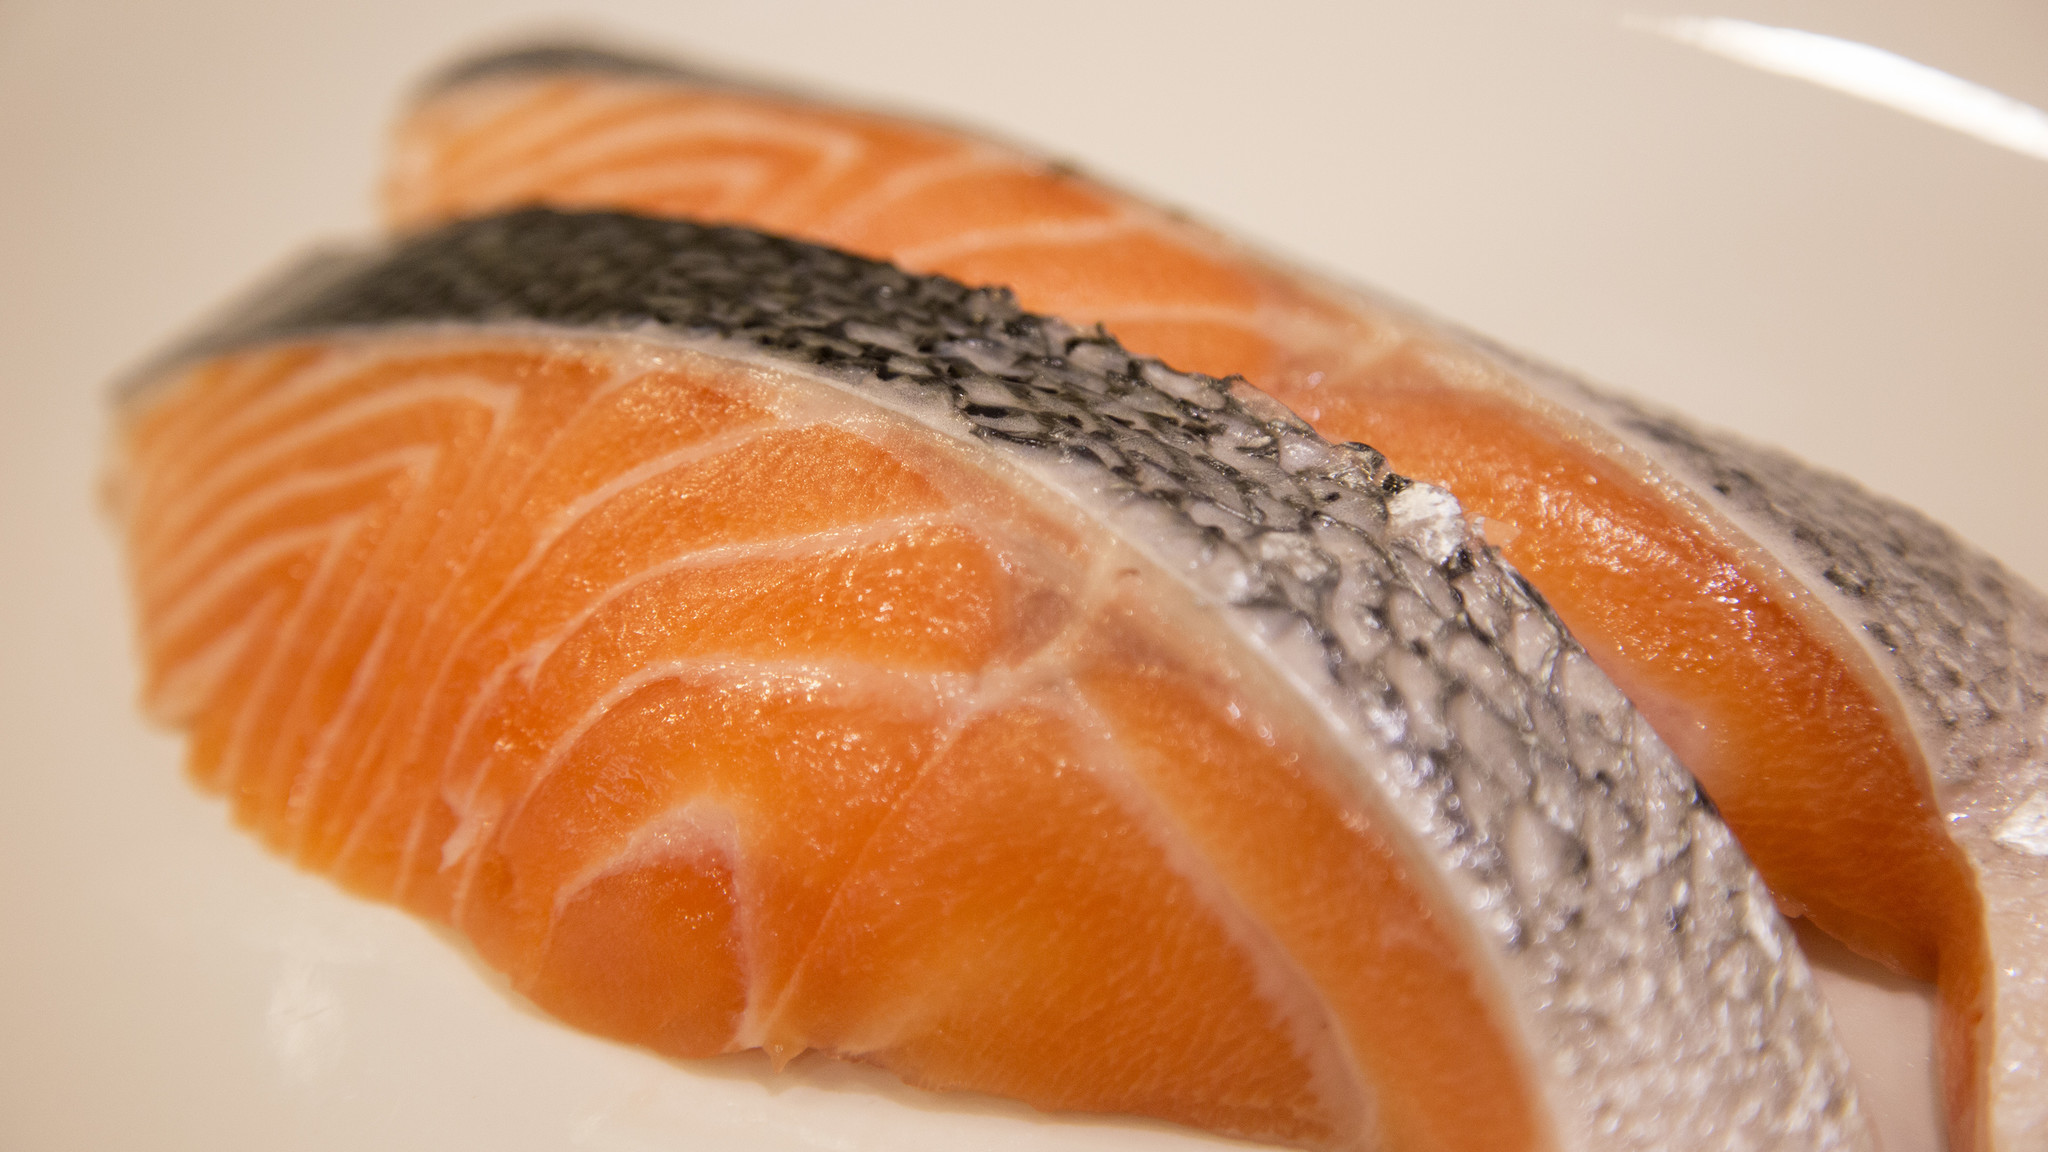 Most farm-raised salmon is considered unsustainable.